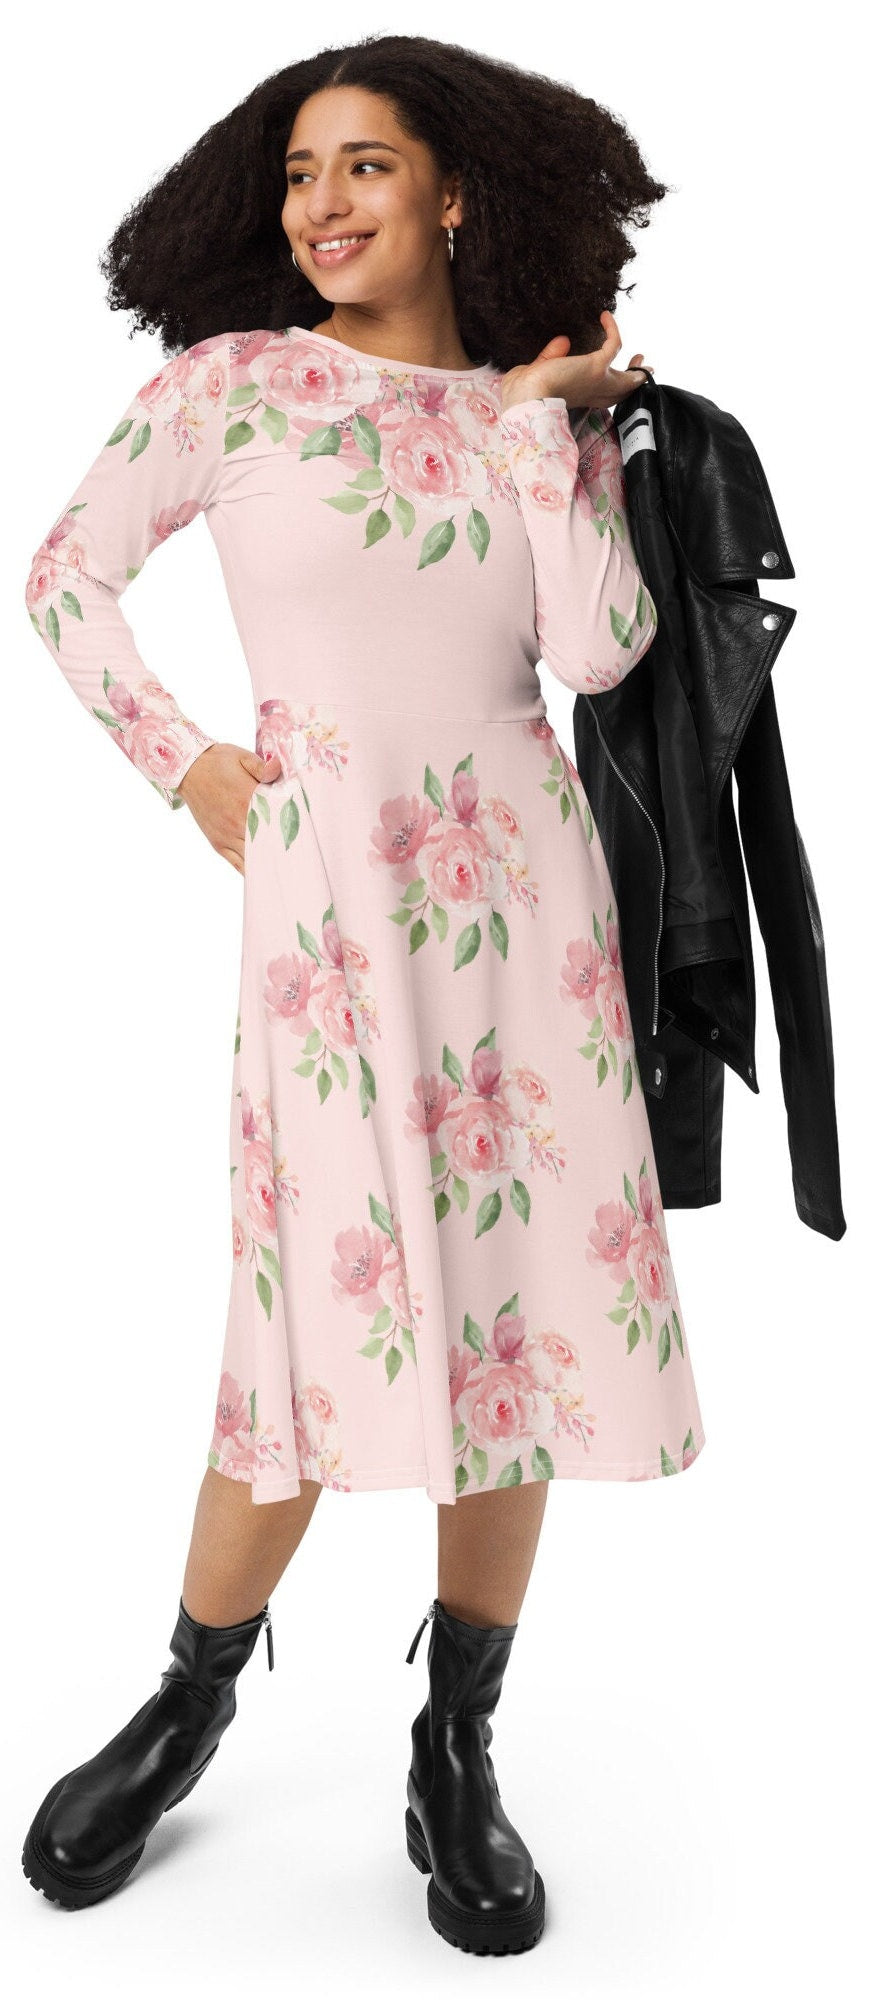 Plus Size Pink Floral print long sleeve midi dress, Modest Pink Floral Shirtdress. Polyester Fit and Flare Oversized Dress